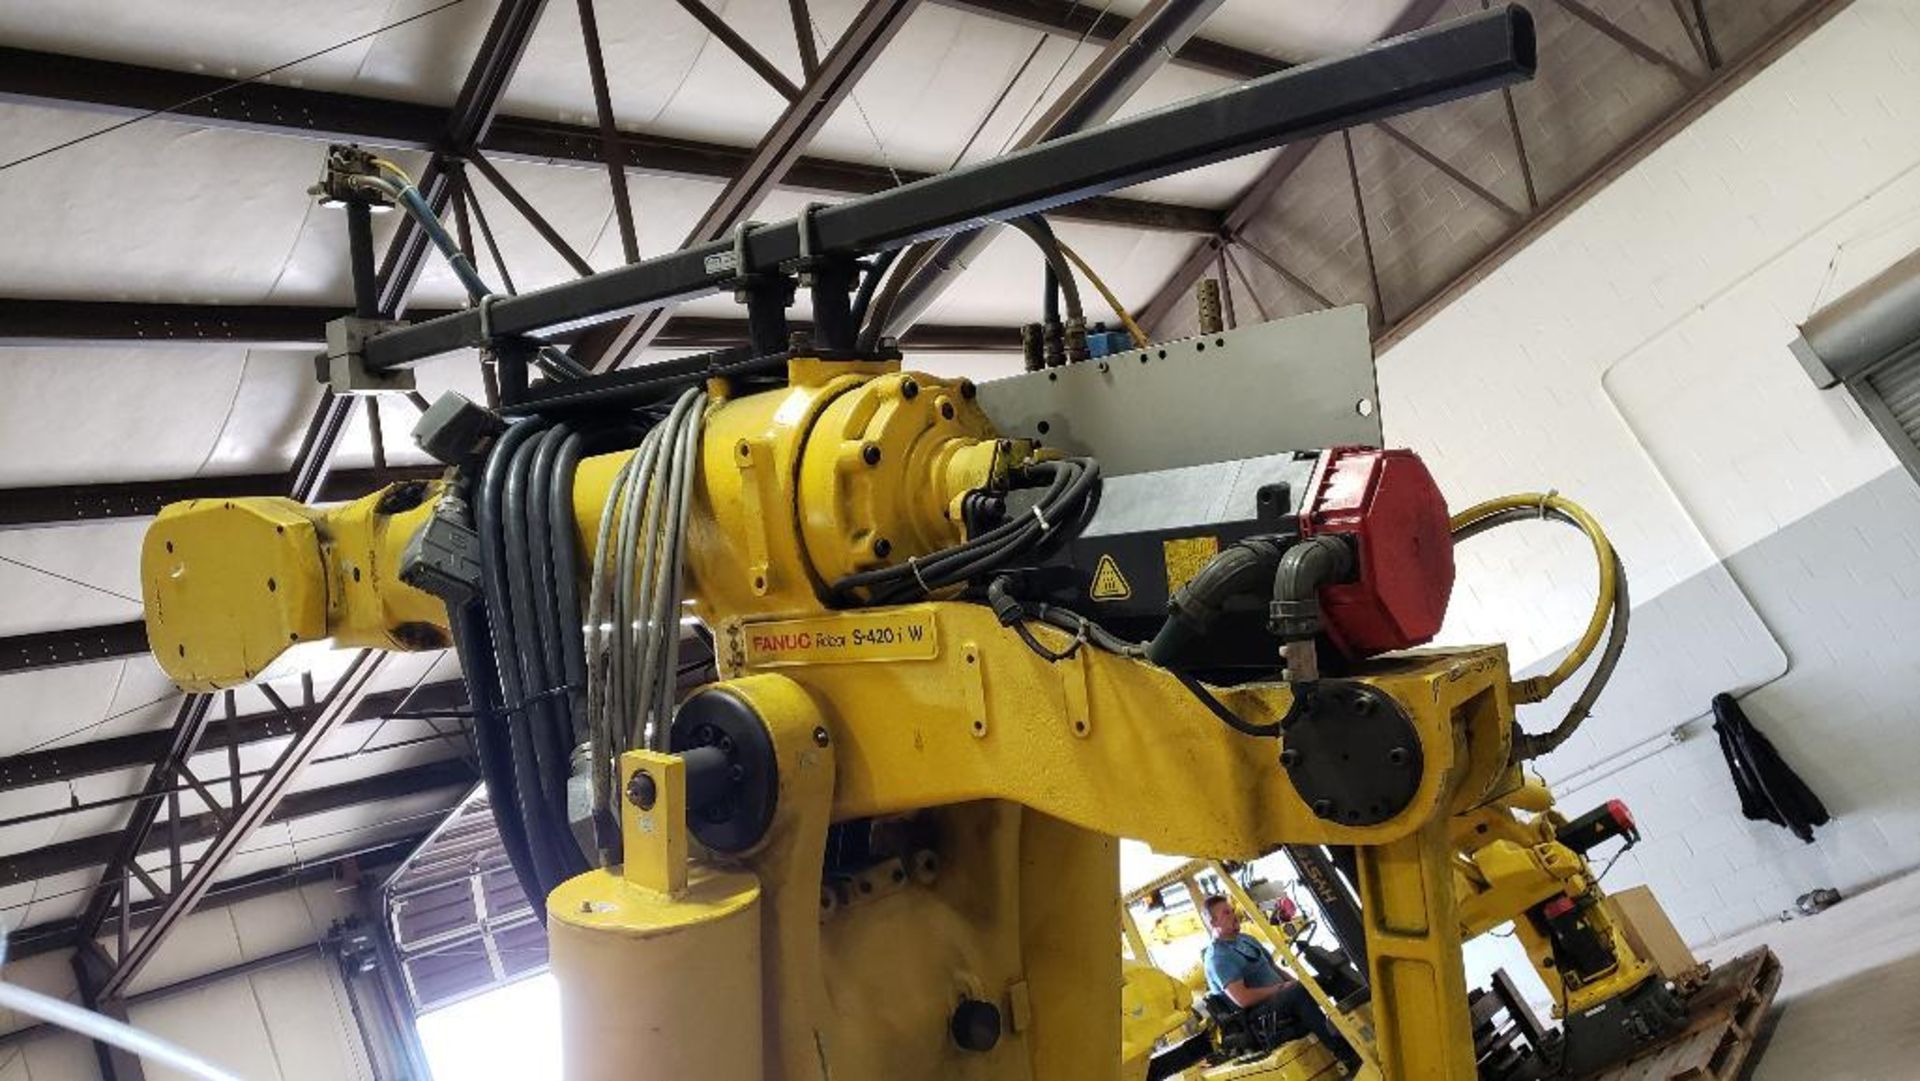 Fanuc S-420iW robot 6-axis arm. - Image 9 of 9